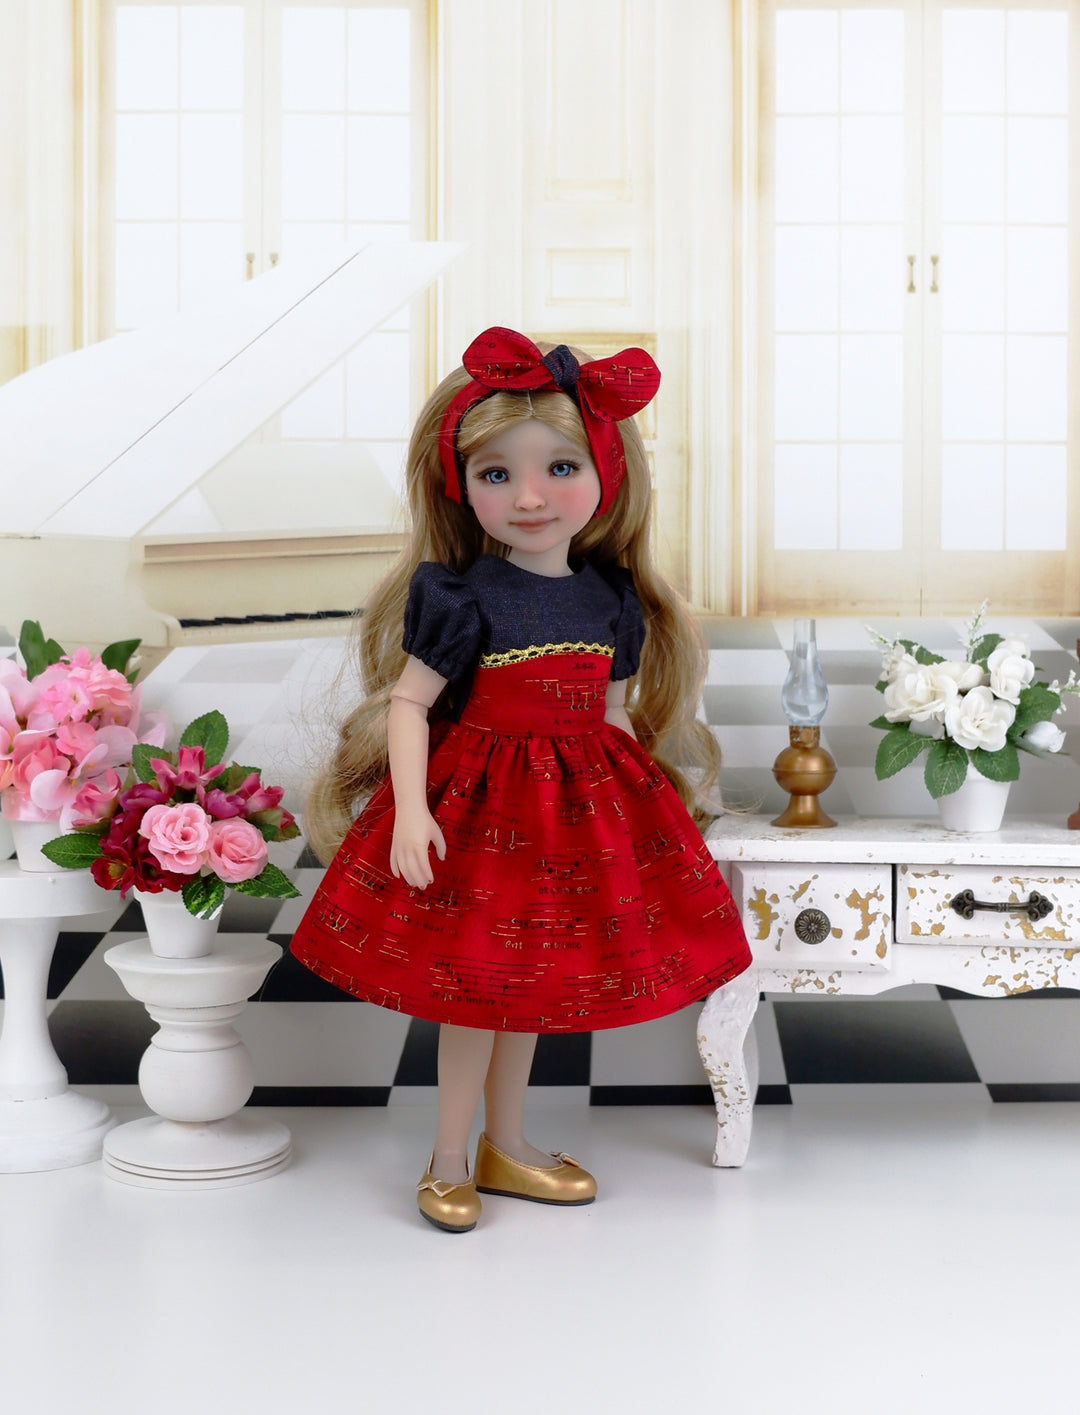 Love's Serenade - dress and shoes for Ruby Red Fashion Friends doll